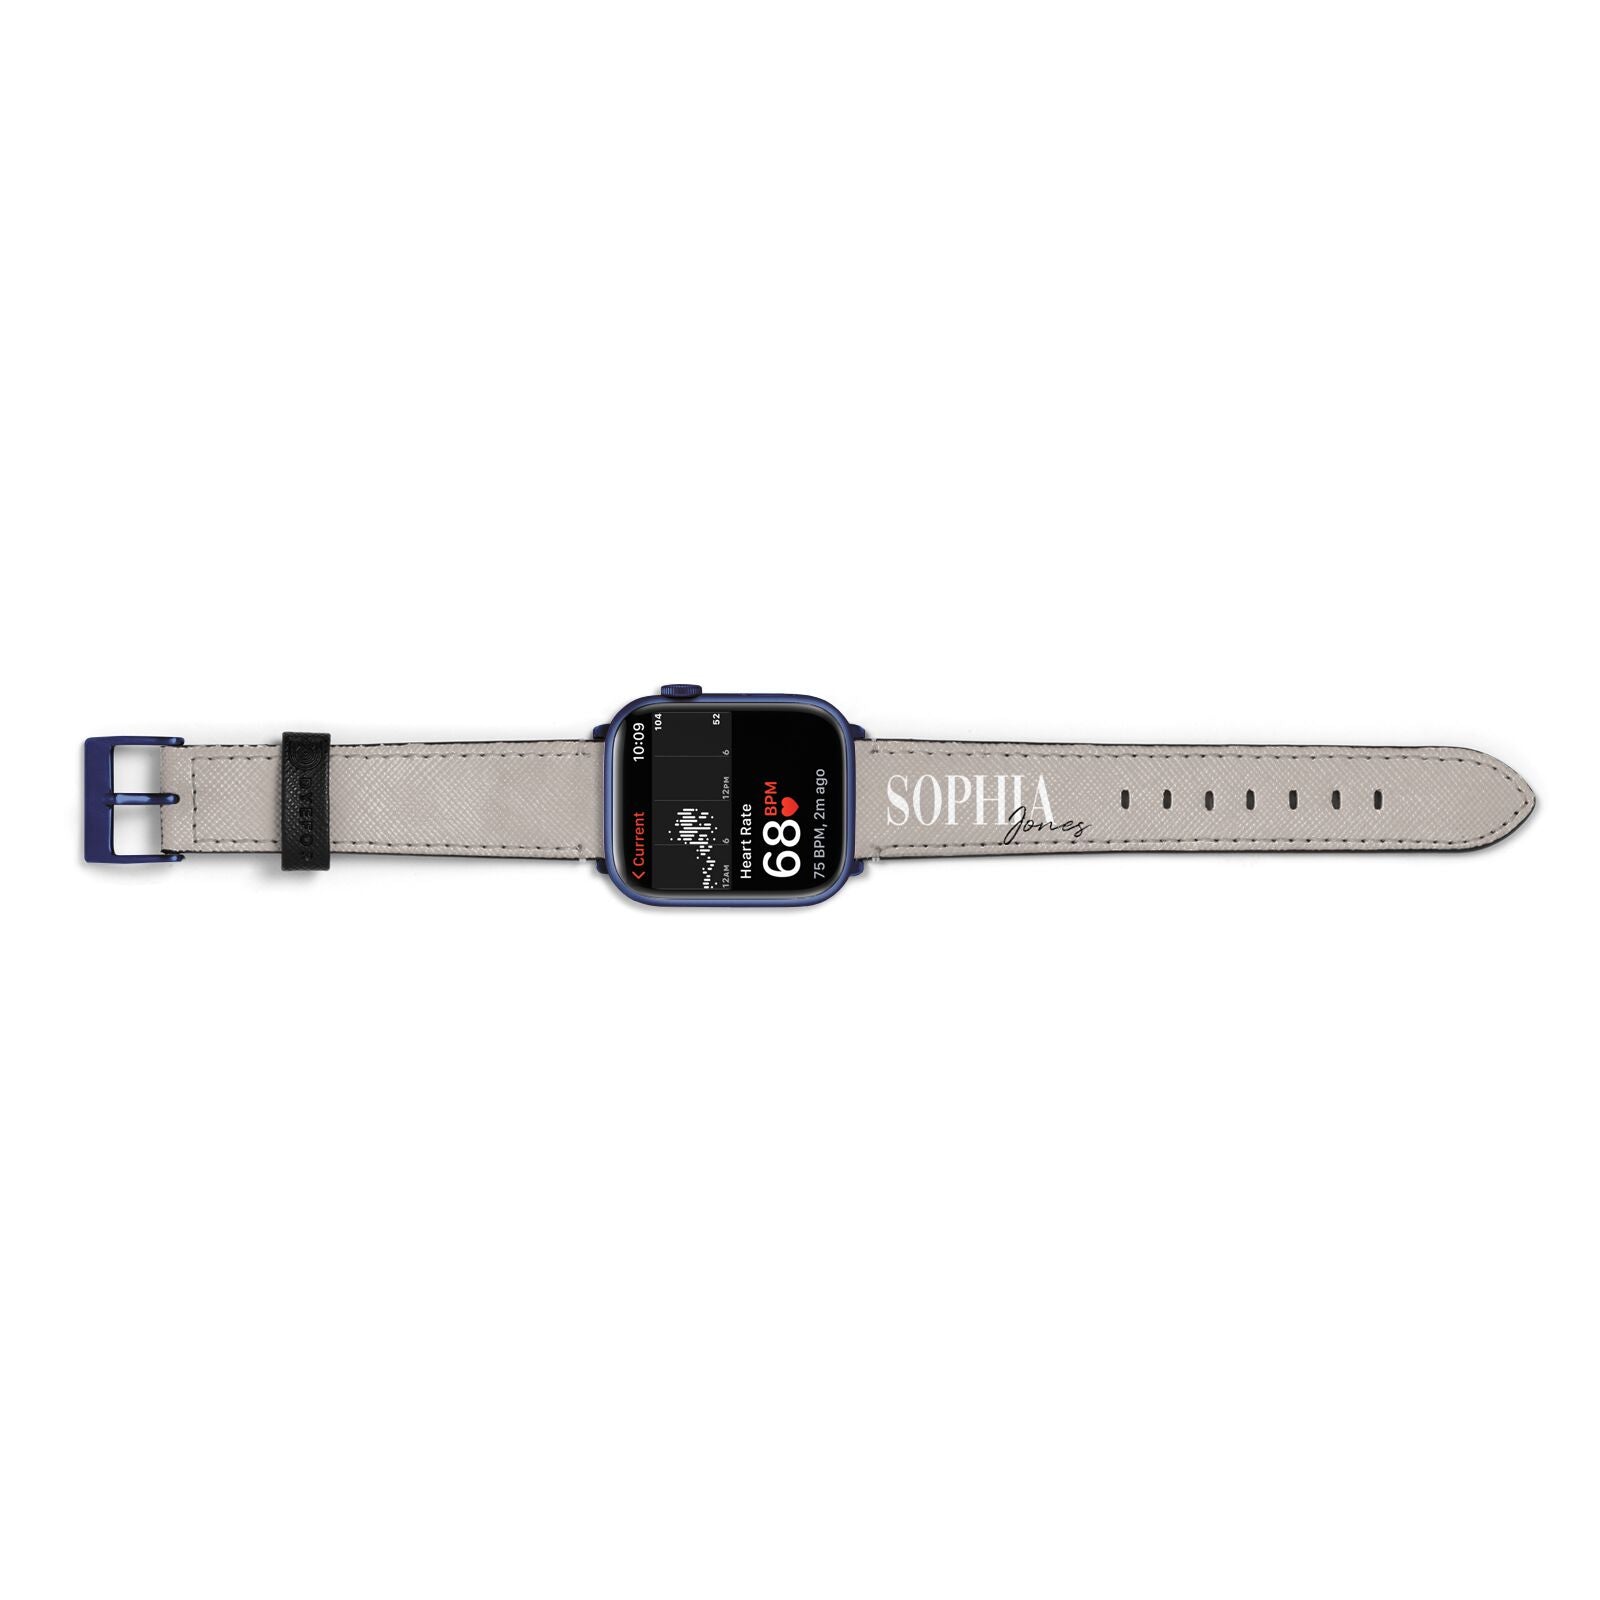 Stone Colour with Personalised Name Apple Watch Strap Size 38mm Landscape Image Blue Hardware